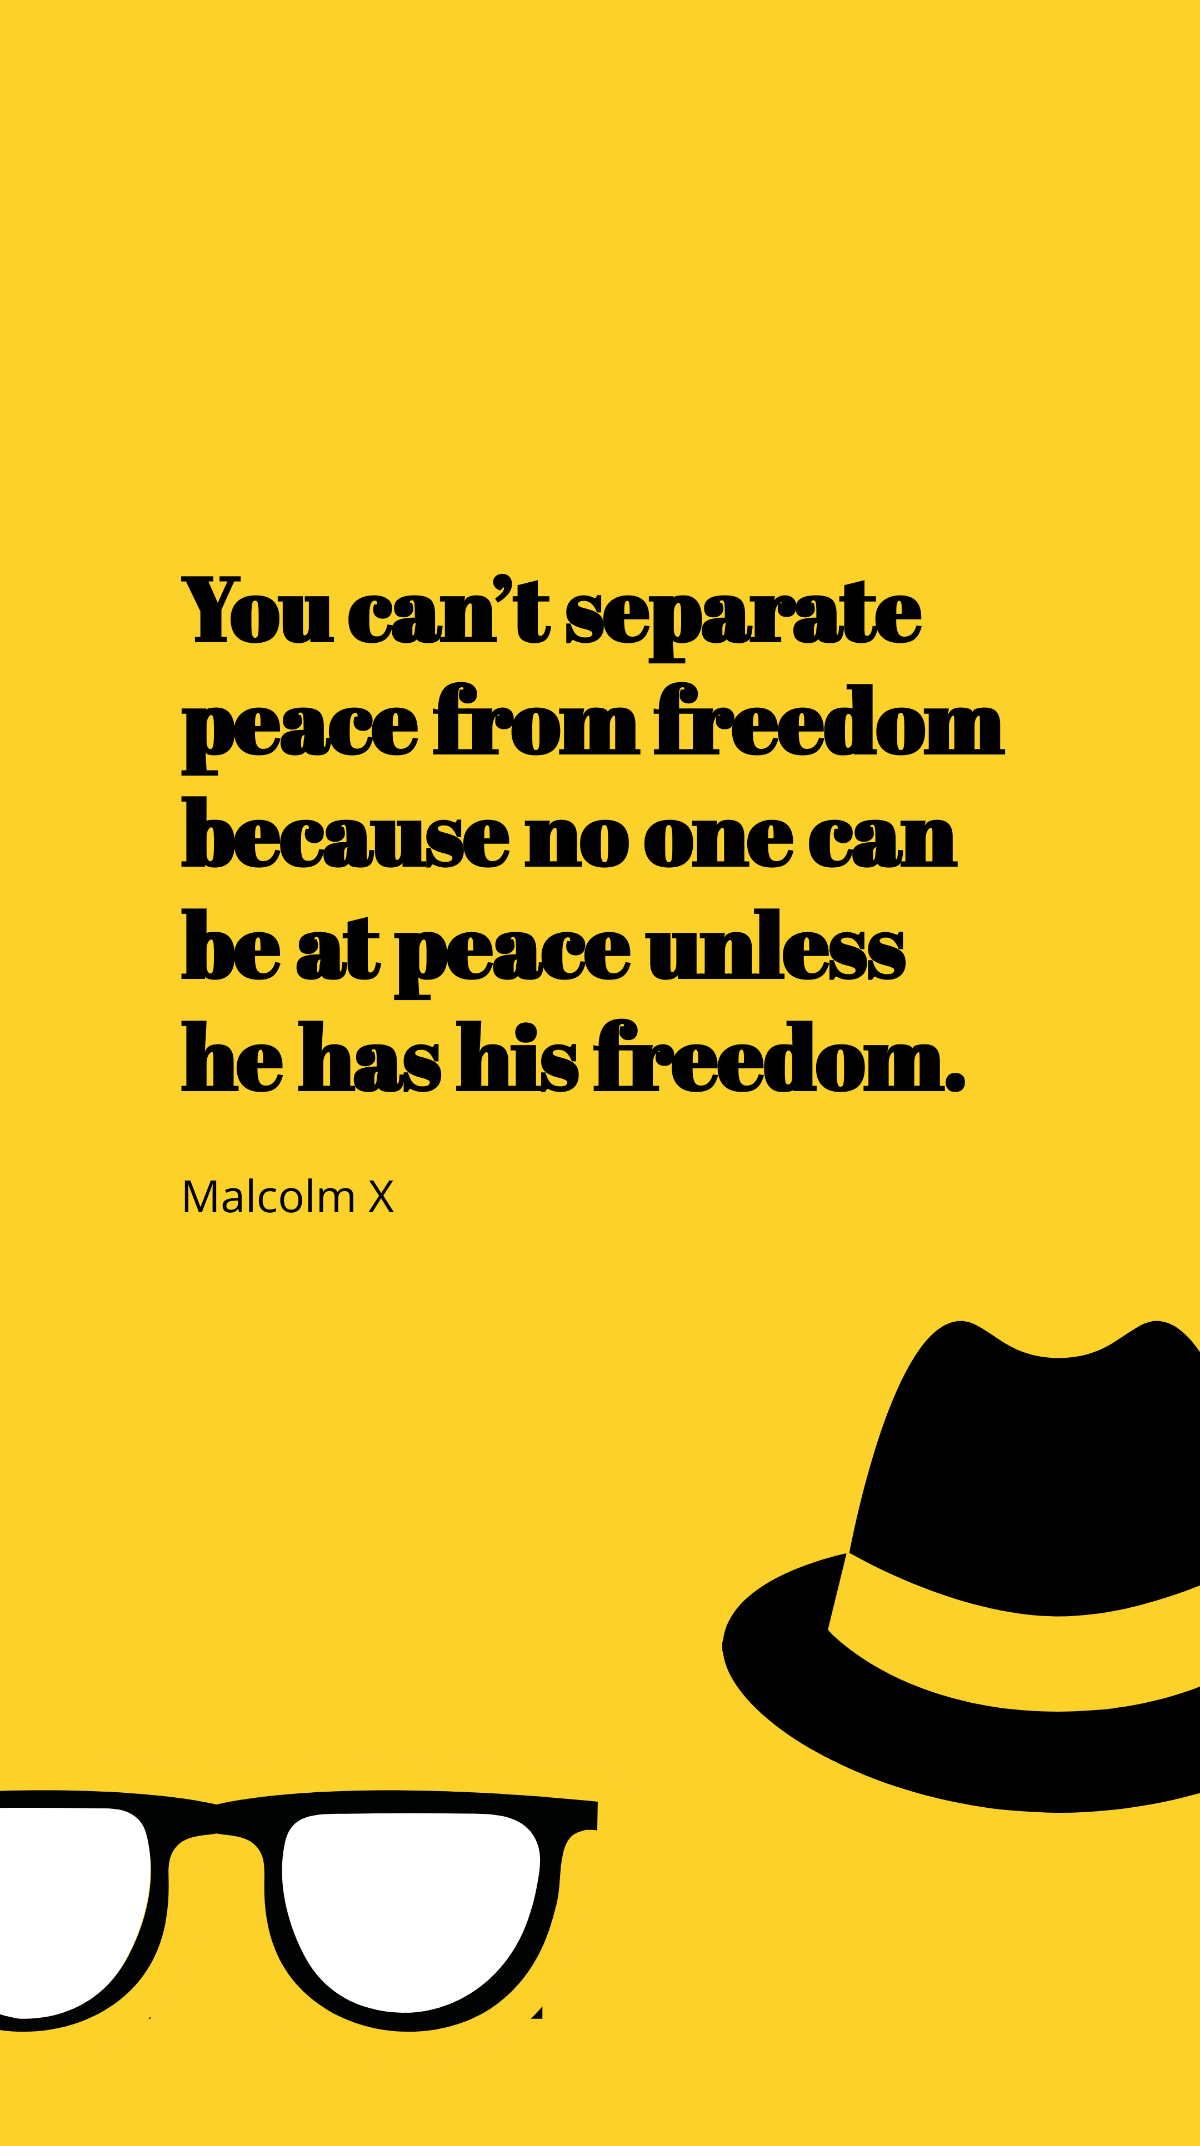 Malcolm X - You can’t separate peace from freedom because no one can be at peace unless he has his freedom. Template